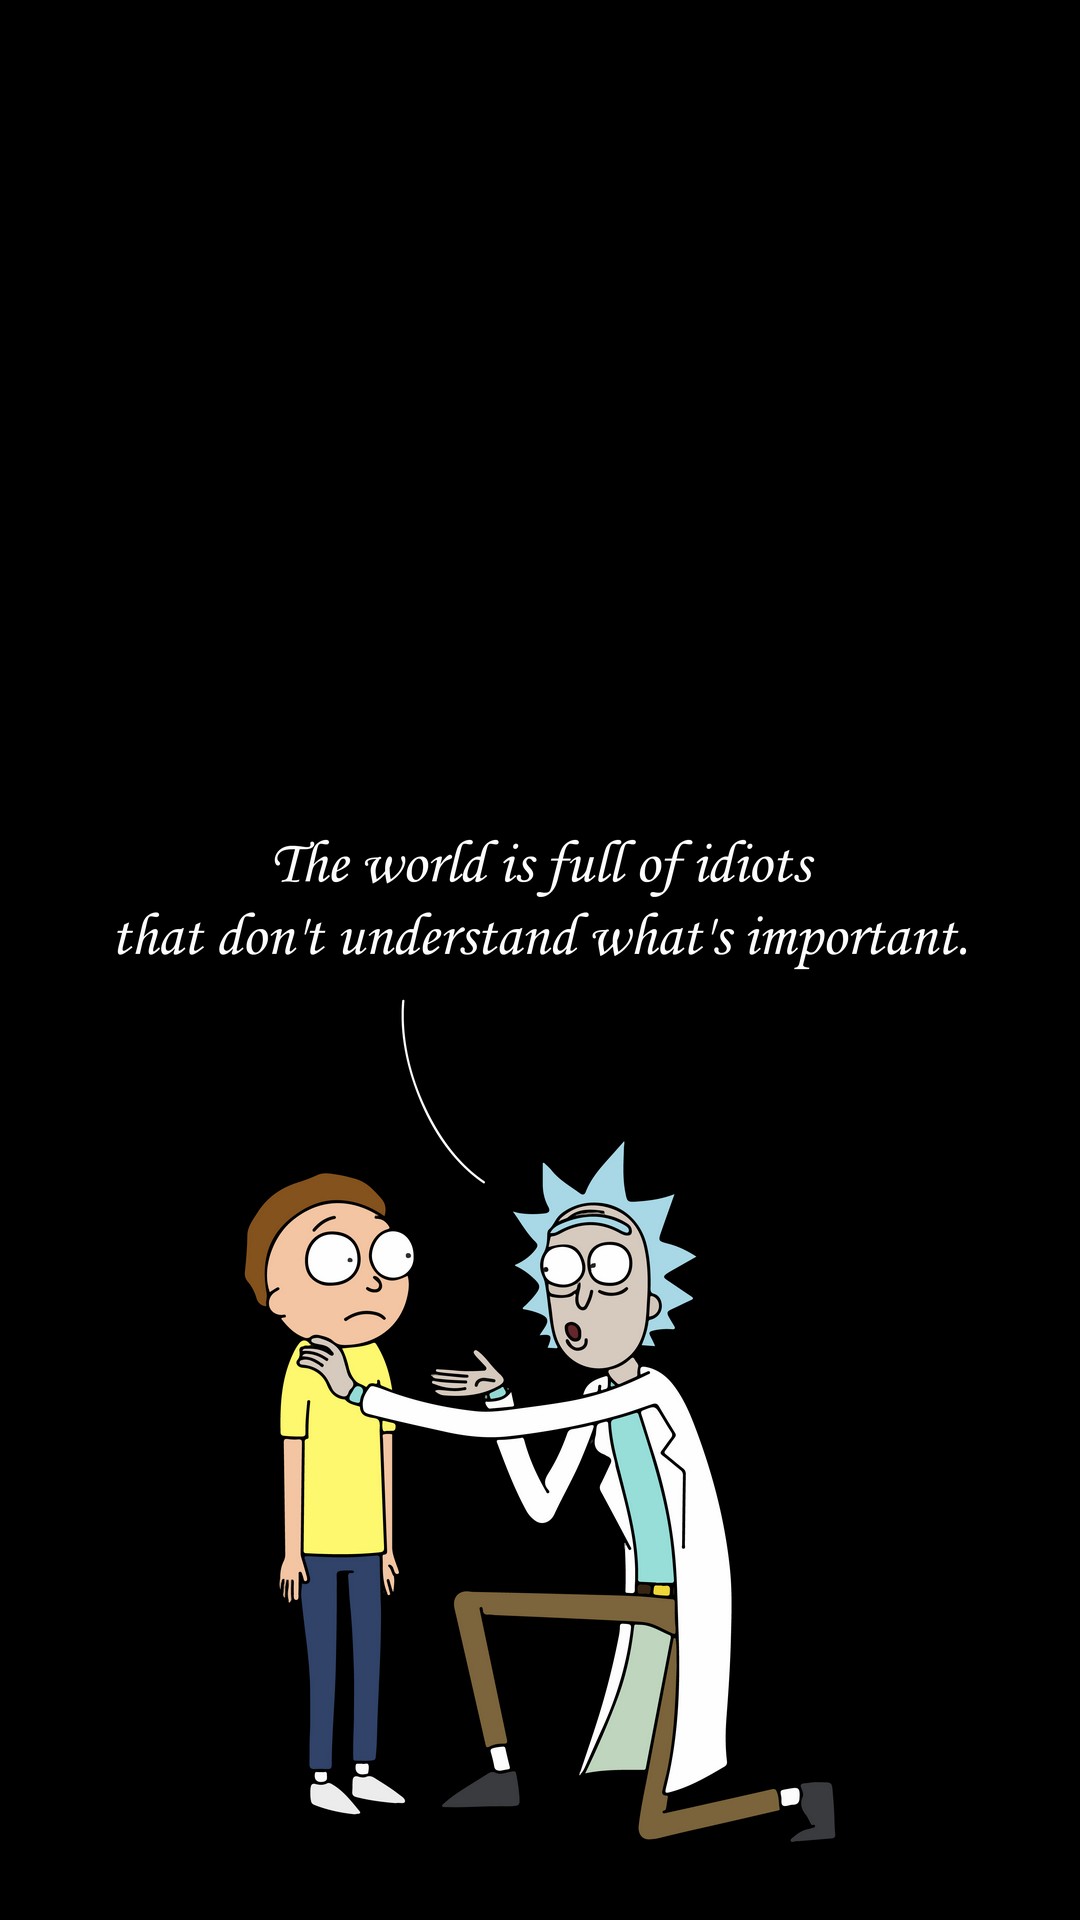 Quotes Wallpaper Rick And Morty iPhone resolution 1080x1920